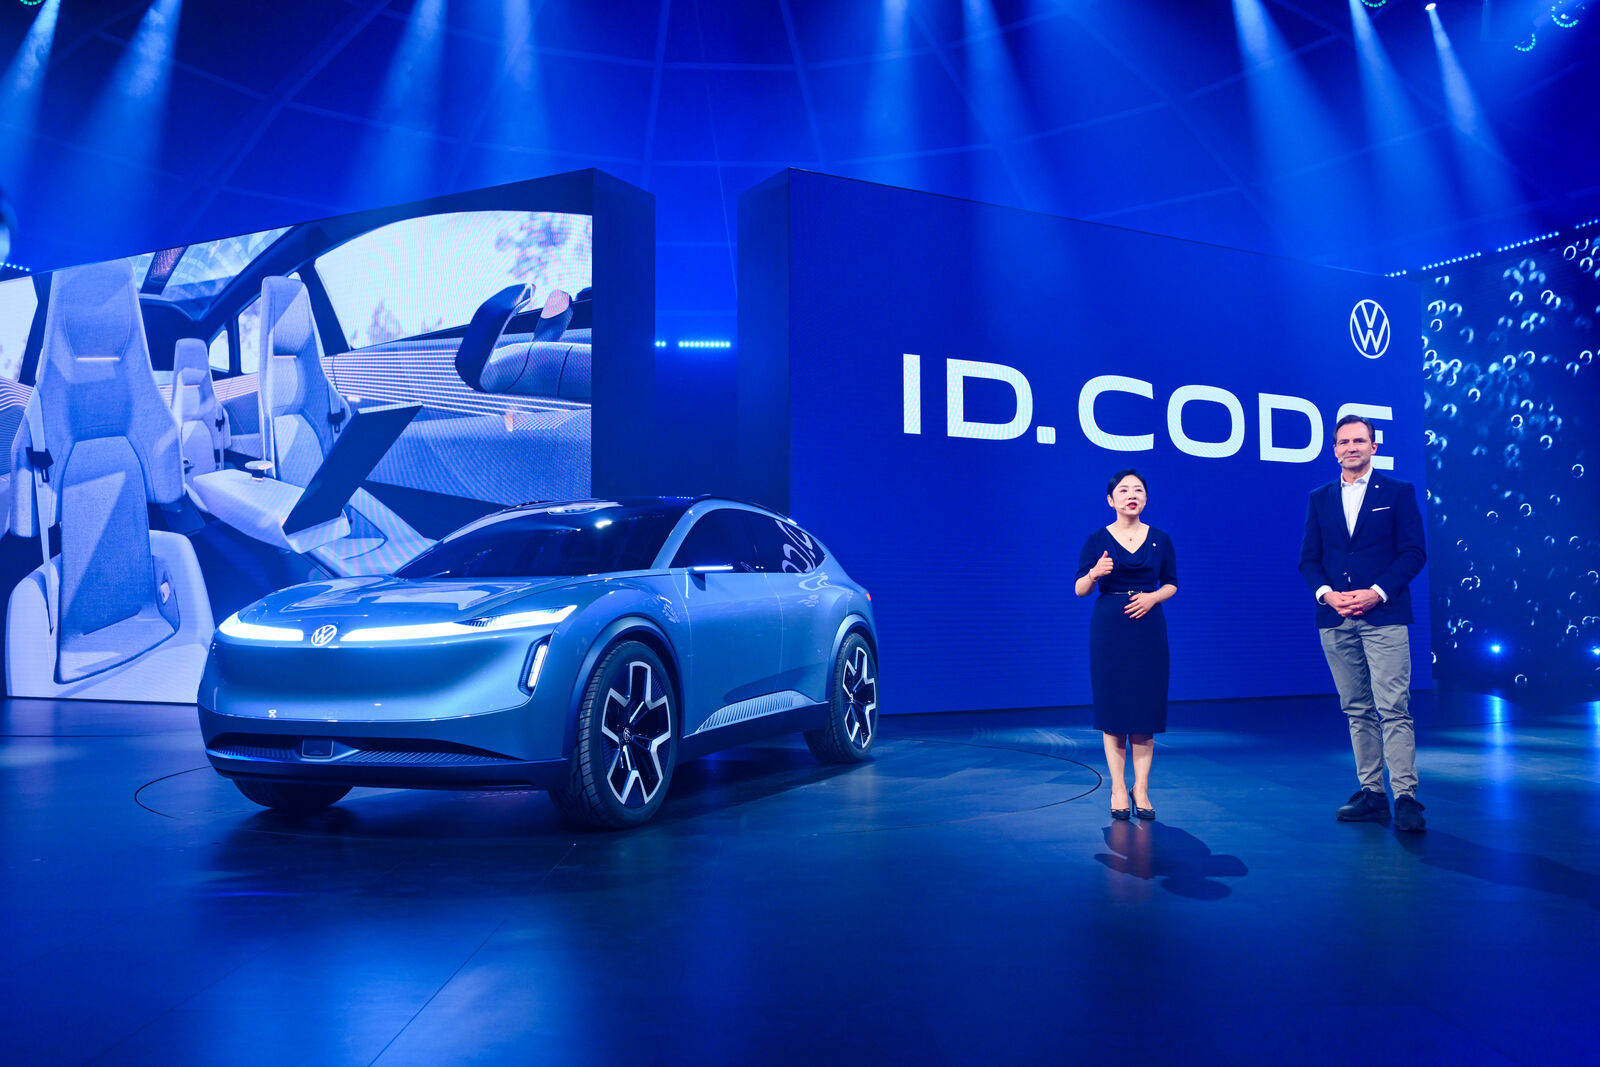 Volkswagen's ID. CODE Concept vision combines a dedicated design language and forward-looking technologies and provides intelligent features of Level 4 autonomous driving and an AI-supported avatar.